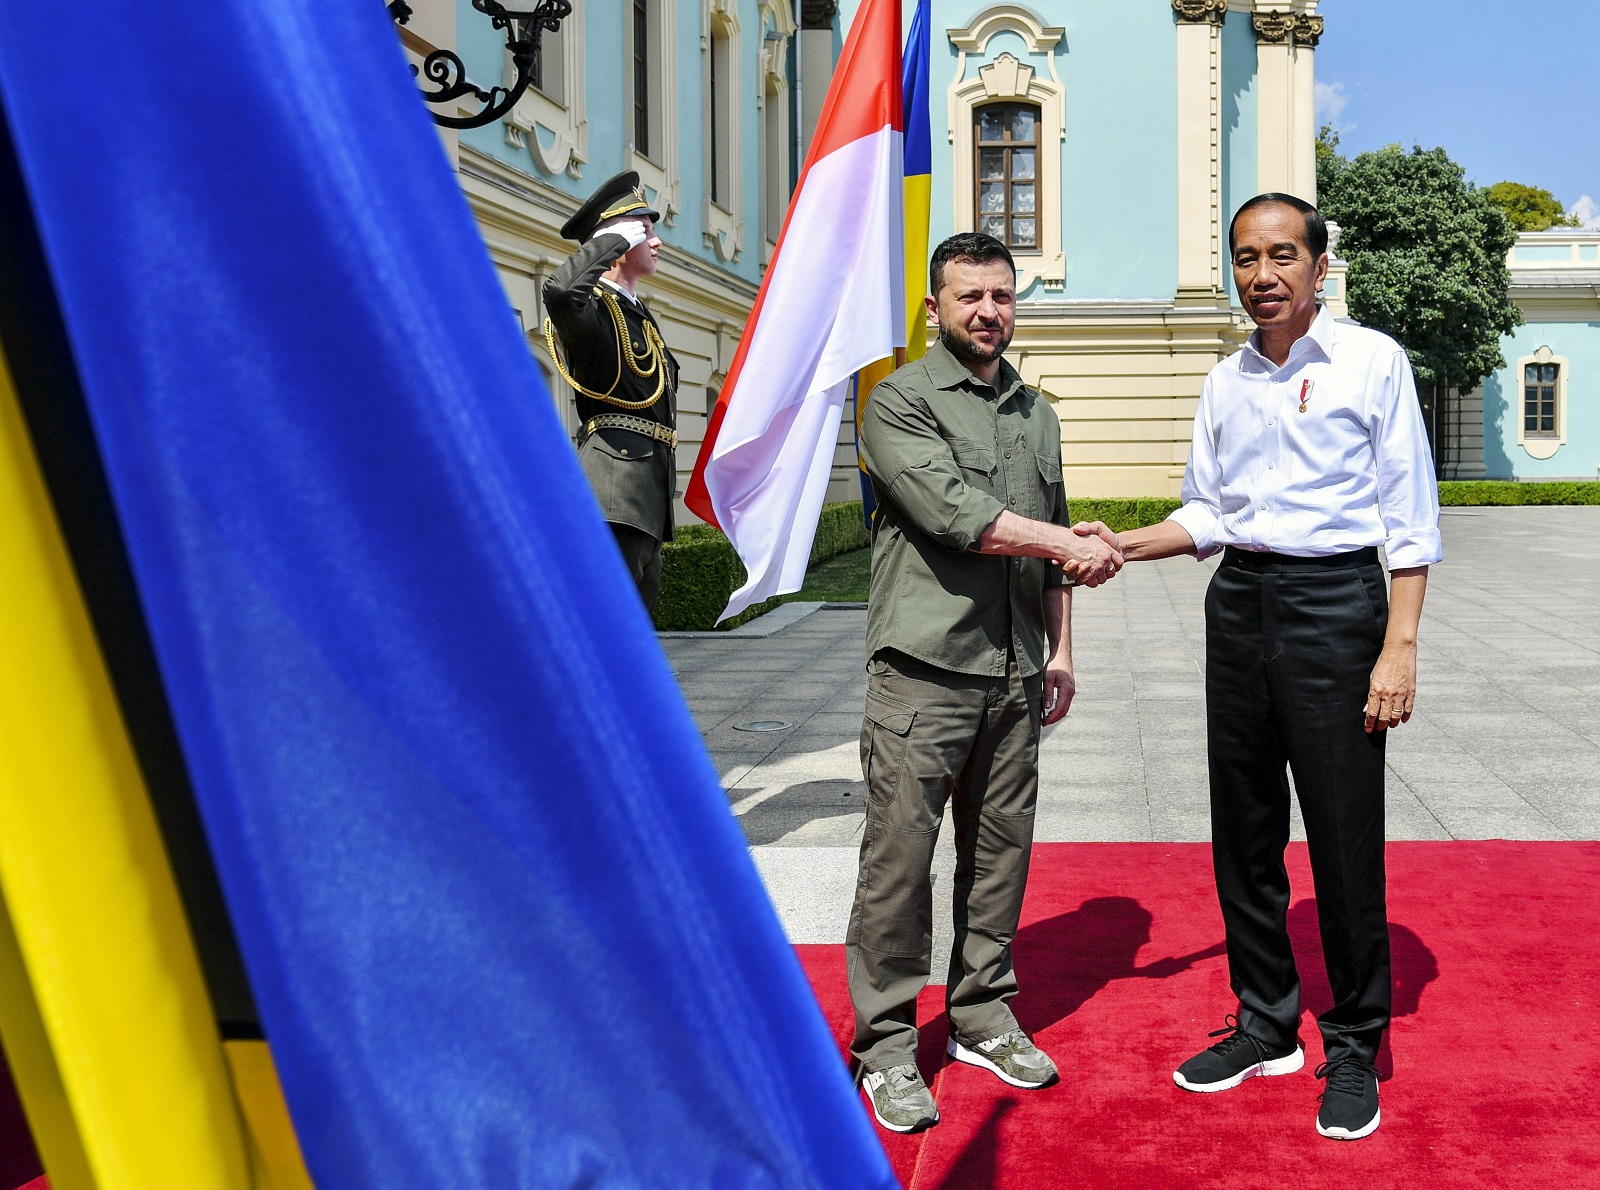 epa10041261 A handout photo made available by the Indonesian Presidential Palace shows Indonesia's President Joko Widodo (R) greeting Ukraine’s President Volodymyr Zelensky (L) during their meeting at the presidential palace in Kyiv (Kiev), Ukraine, 29 June 2022. Widodo is on a peace-building mission visit to Ukraine and Russia to urge his Russian and Ukrainian counterparts to open for dialogue and ceasefire.  EPA/LAILY RACHEV/INDONESIAN PRESIDENTIAL PALACE/ HANDOUT  HANDOUT EDITORIAL USE ONLY/NO SALES